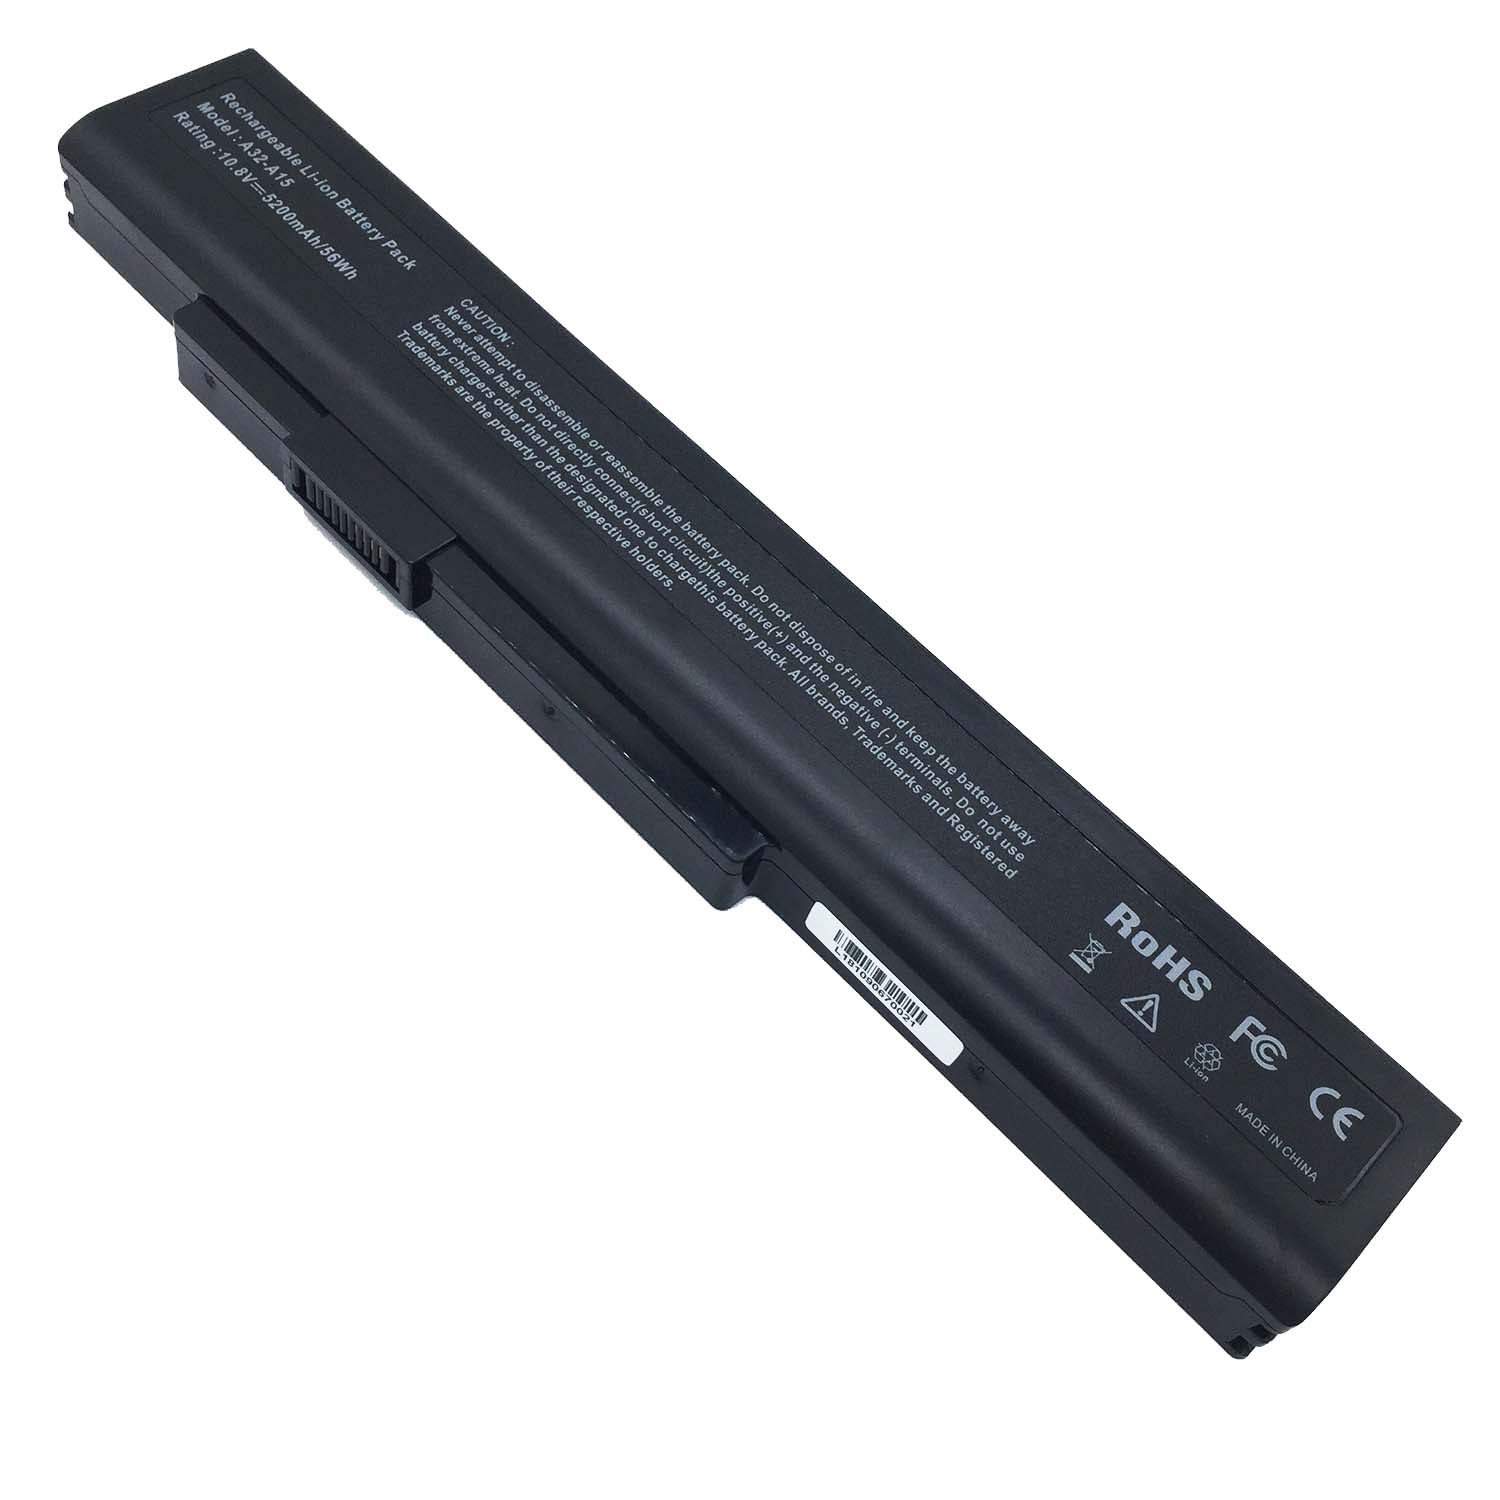 Replacement Battery for Medion Medion Akoya E7201 battery